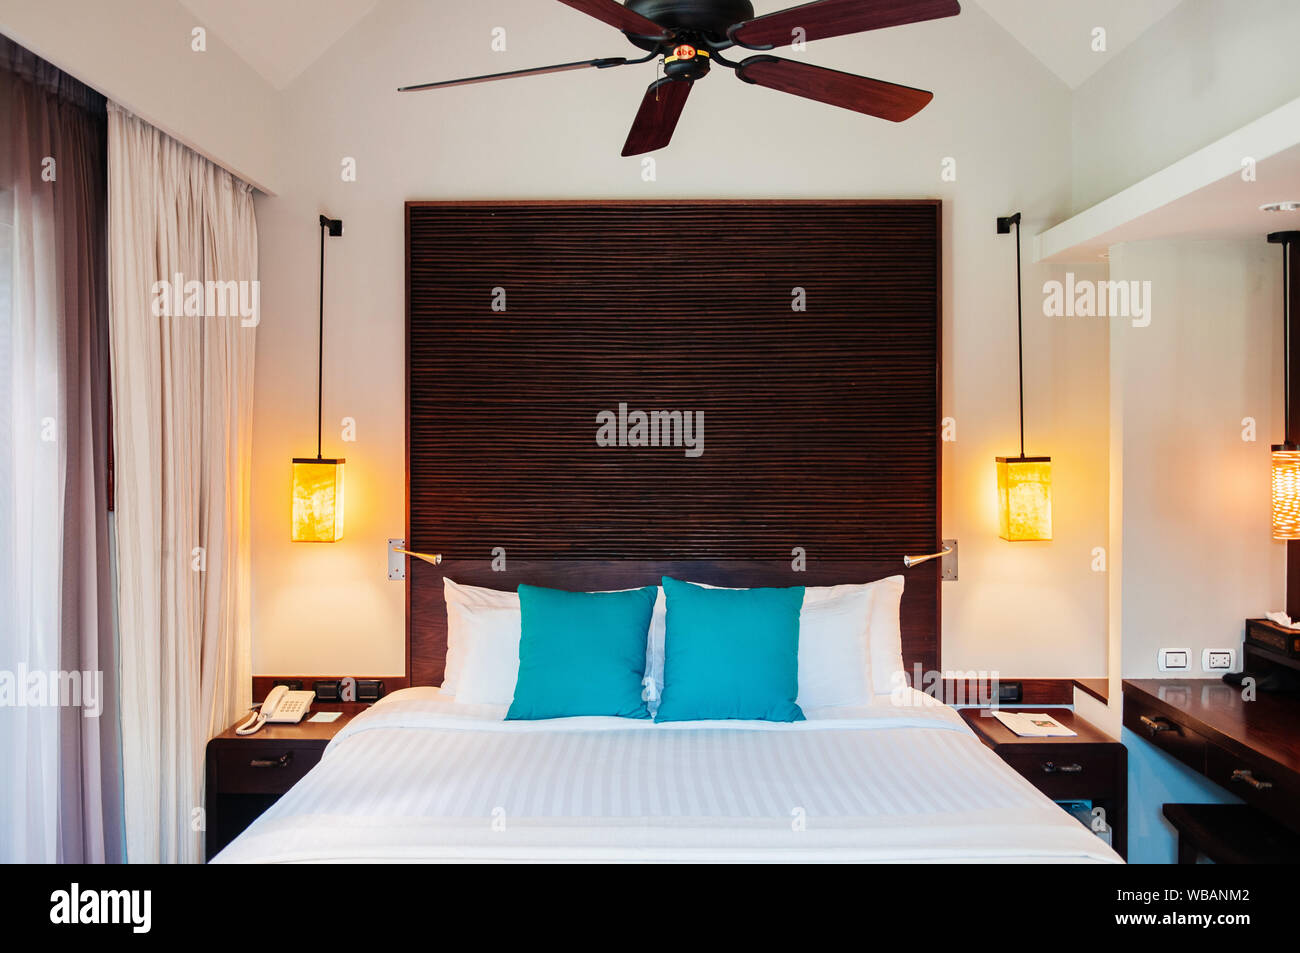 MAY 21, 2014 Krabi, THAILAND - Asian Thai tropical luxury resort room with wooden bed and white curtain, pedant lamps and ceiling fan. Contemporary ho Stock Photo